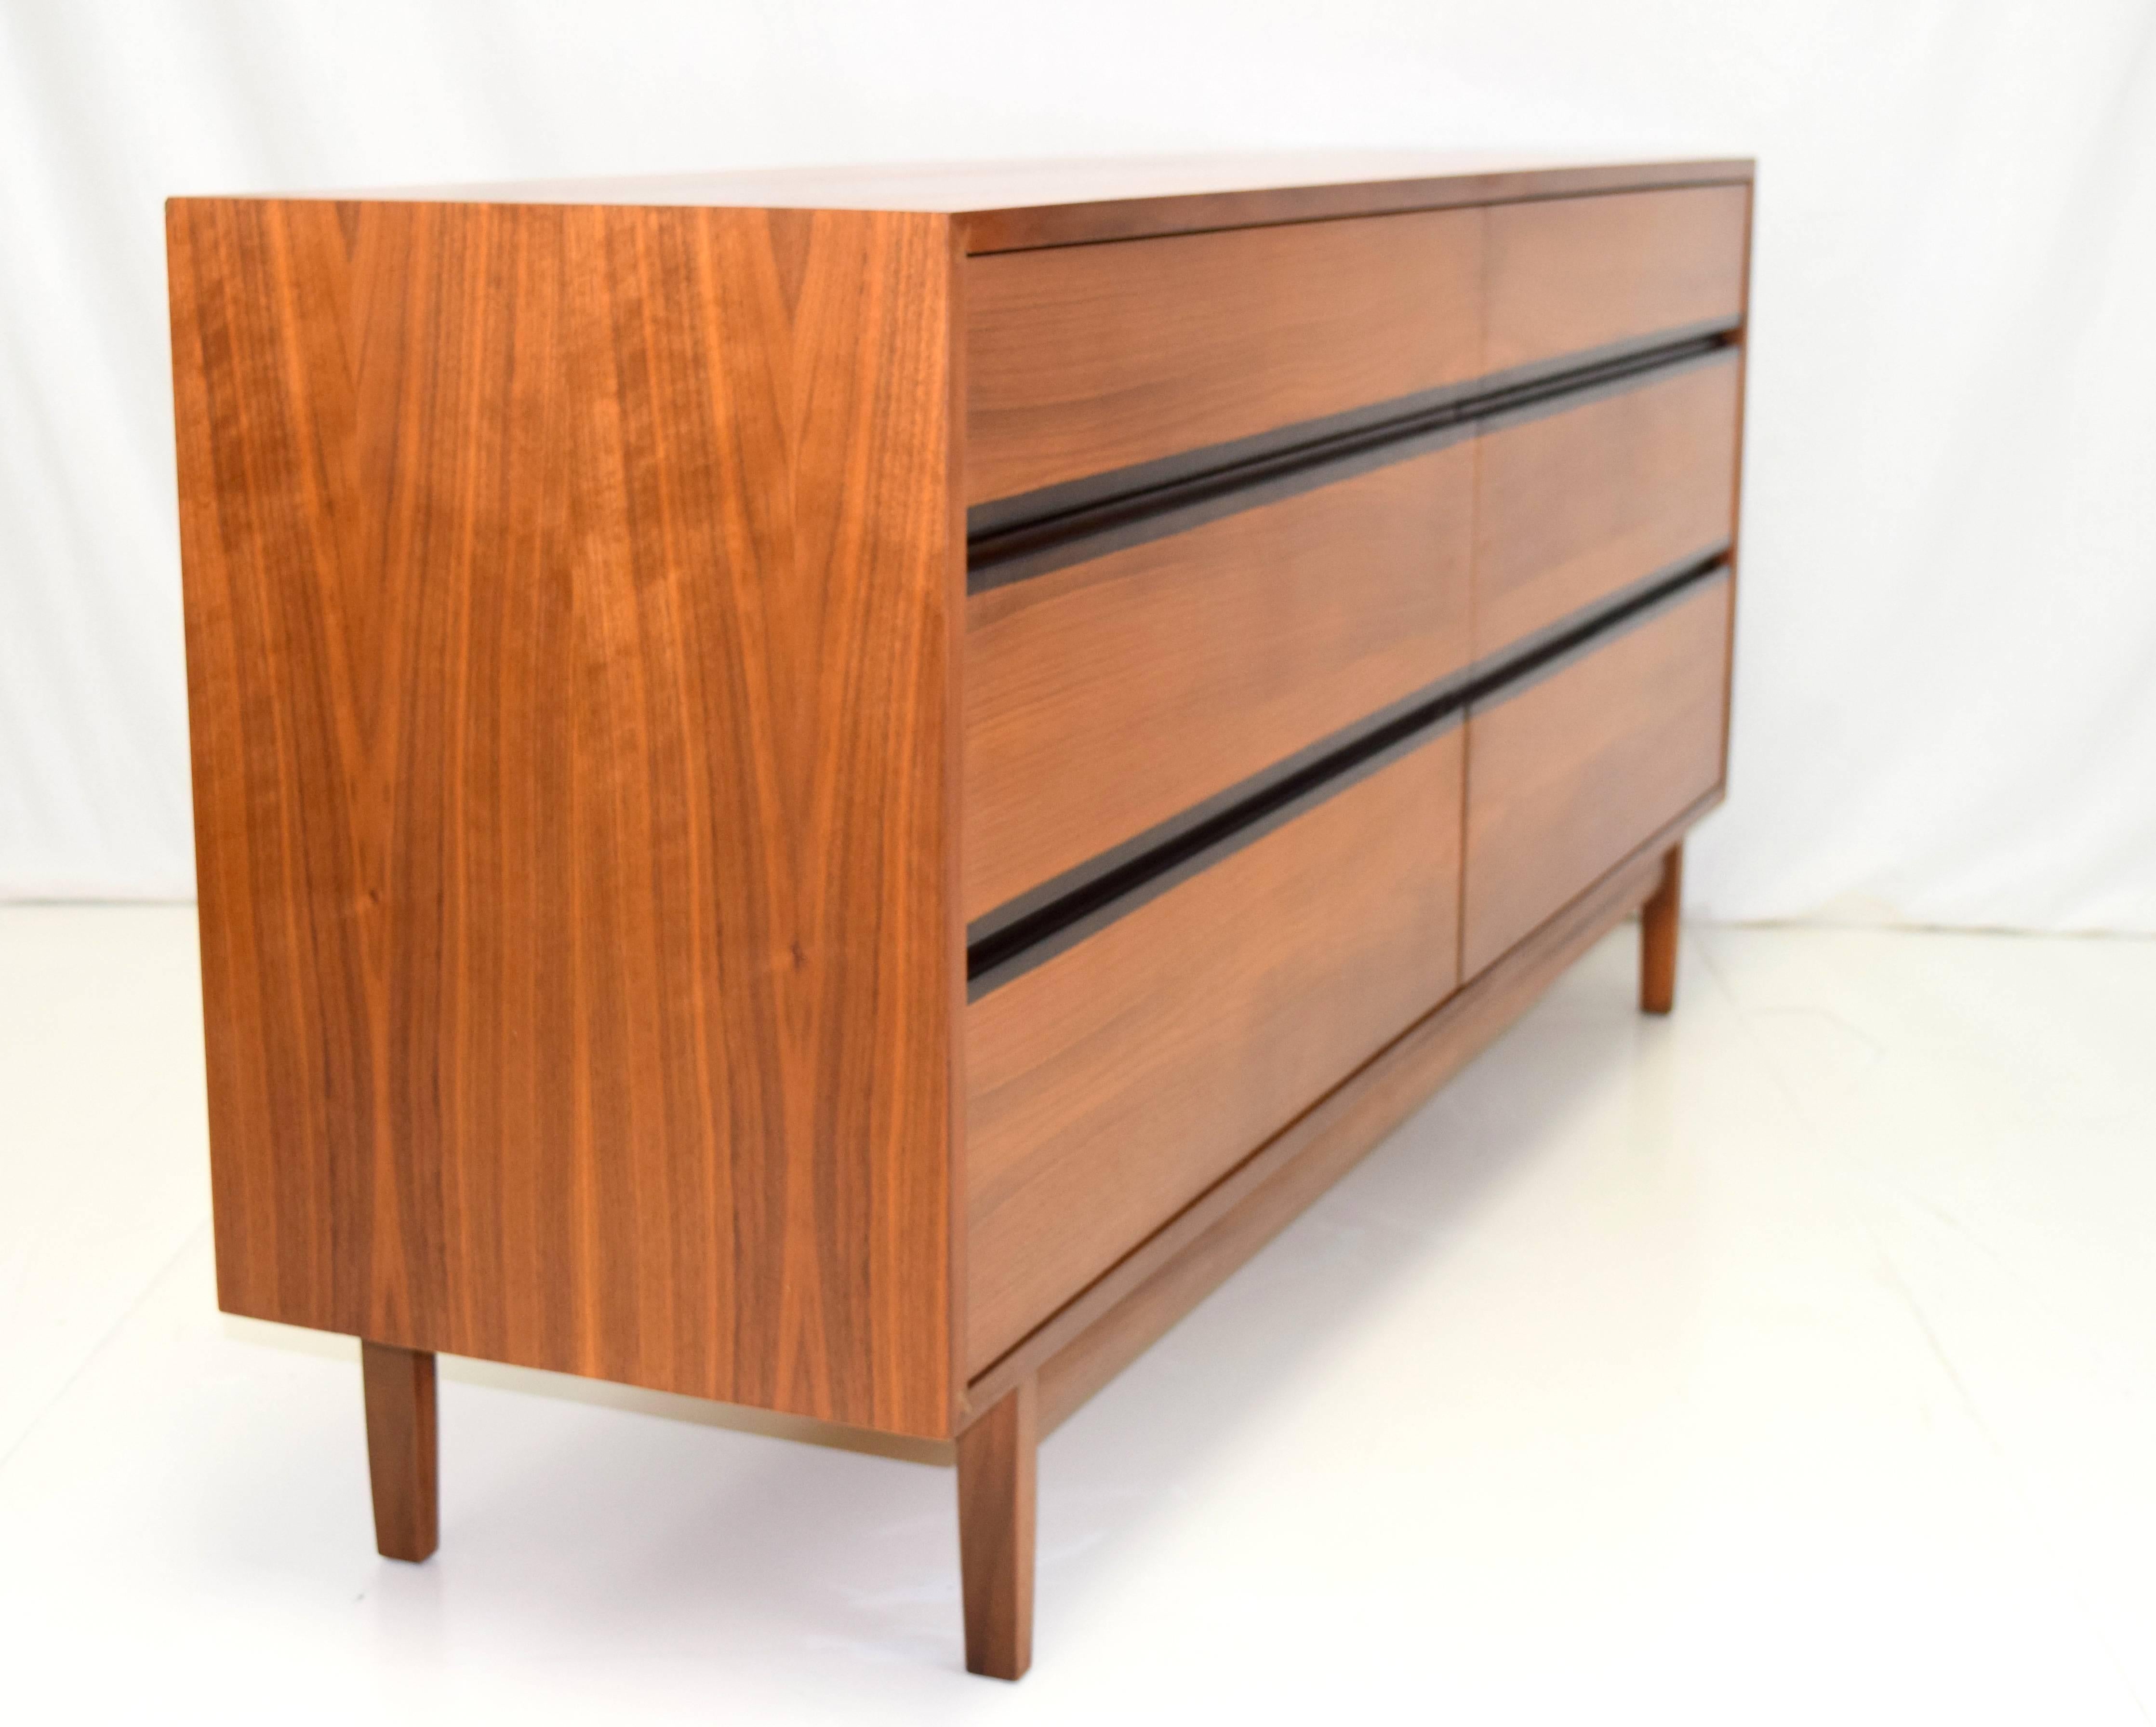 Perfectly scaled walnut six-drawer dresser by Kipp Stewart for Calvin Furniture. Bookmatched drawer fronts creates a fluidity with contrasting bands of full length recessed drawer pulls. Front corners are mitered with perpendicular tenons. Lovely